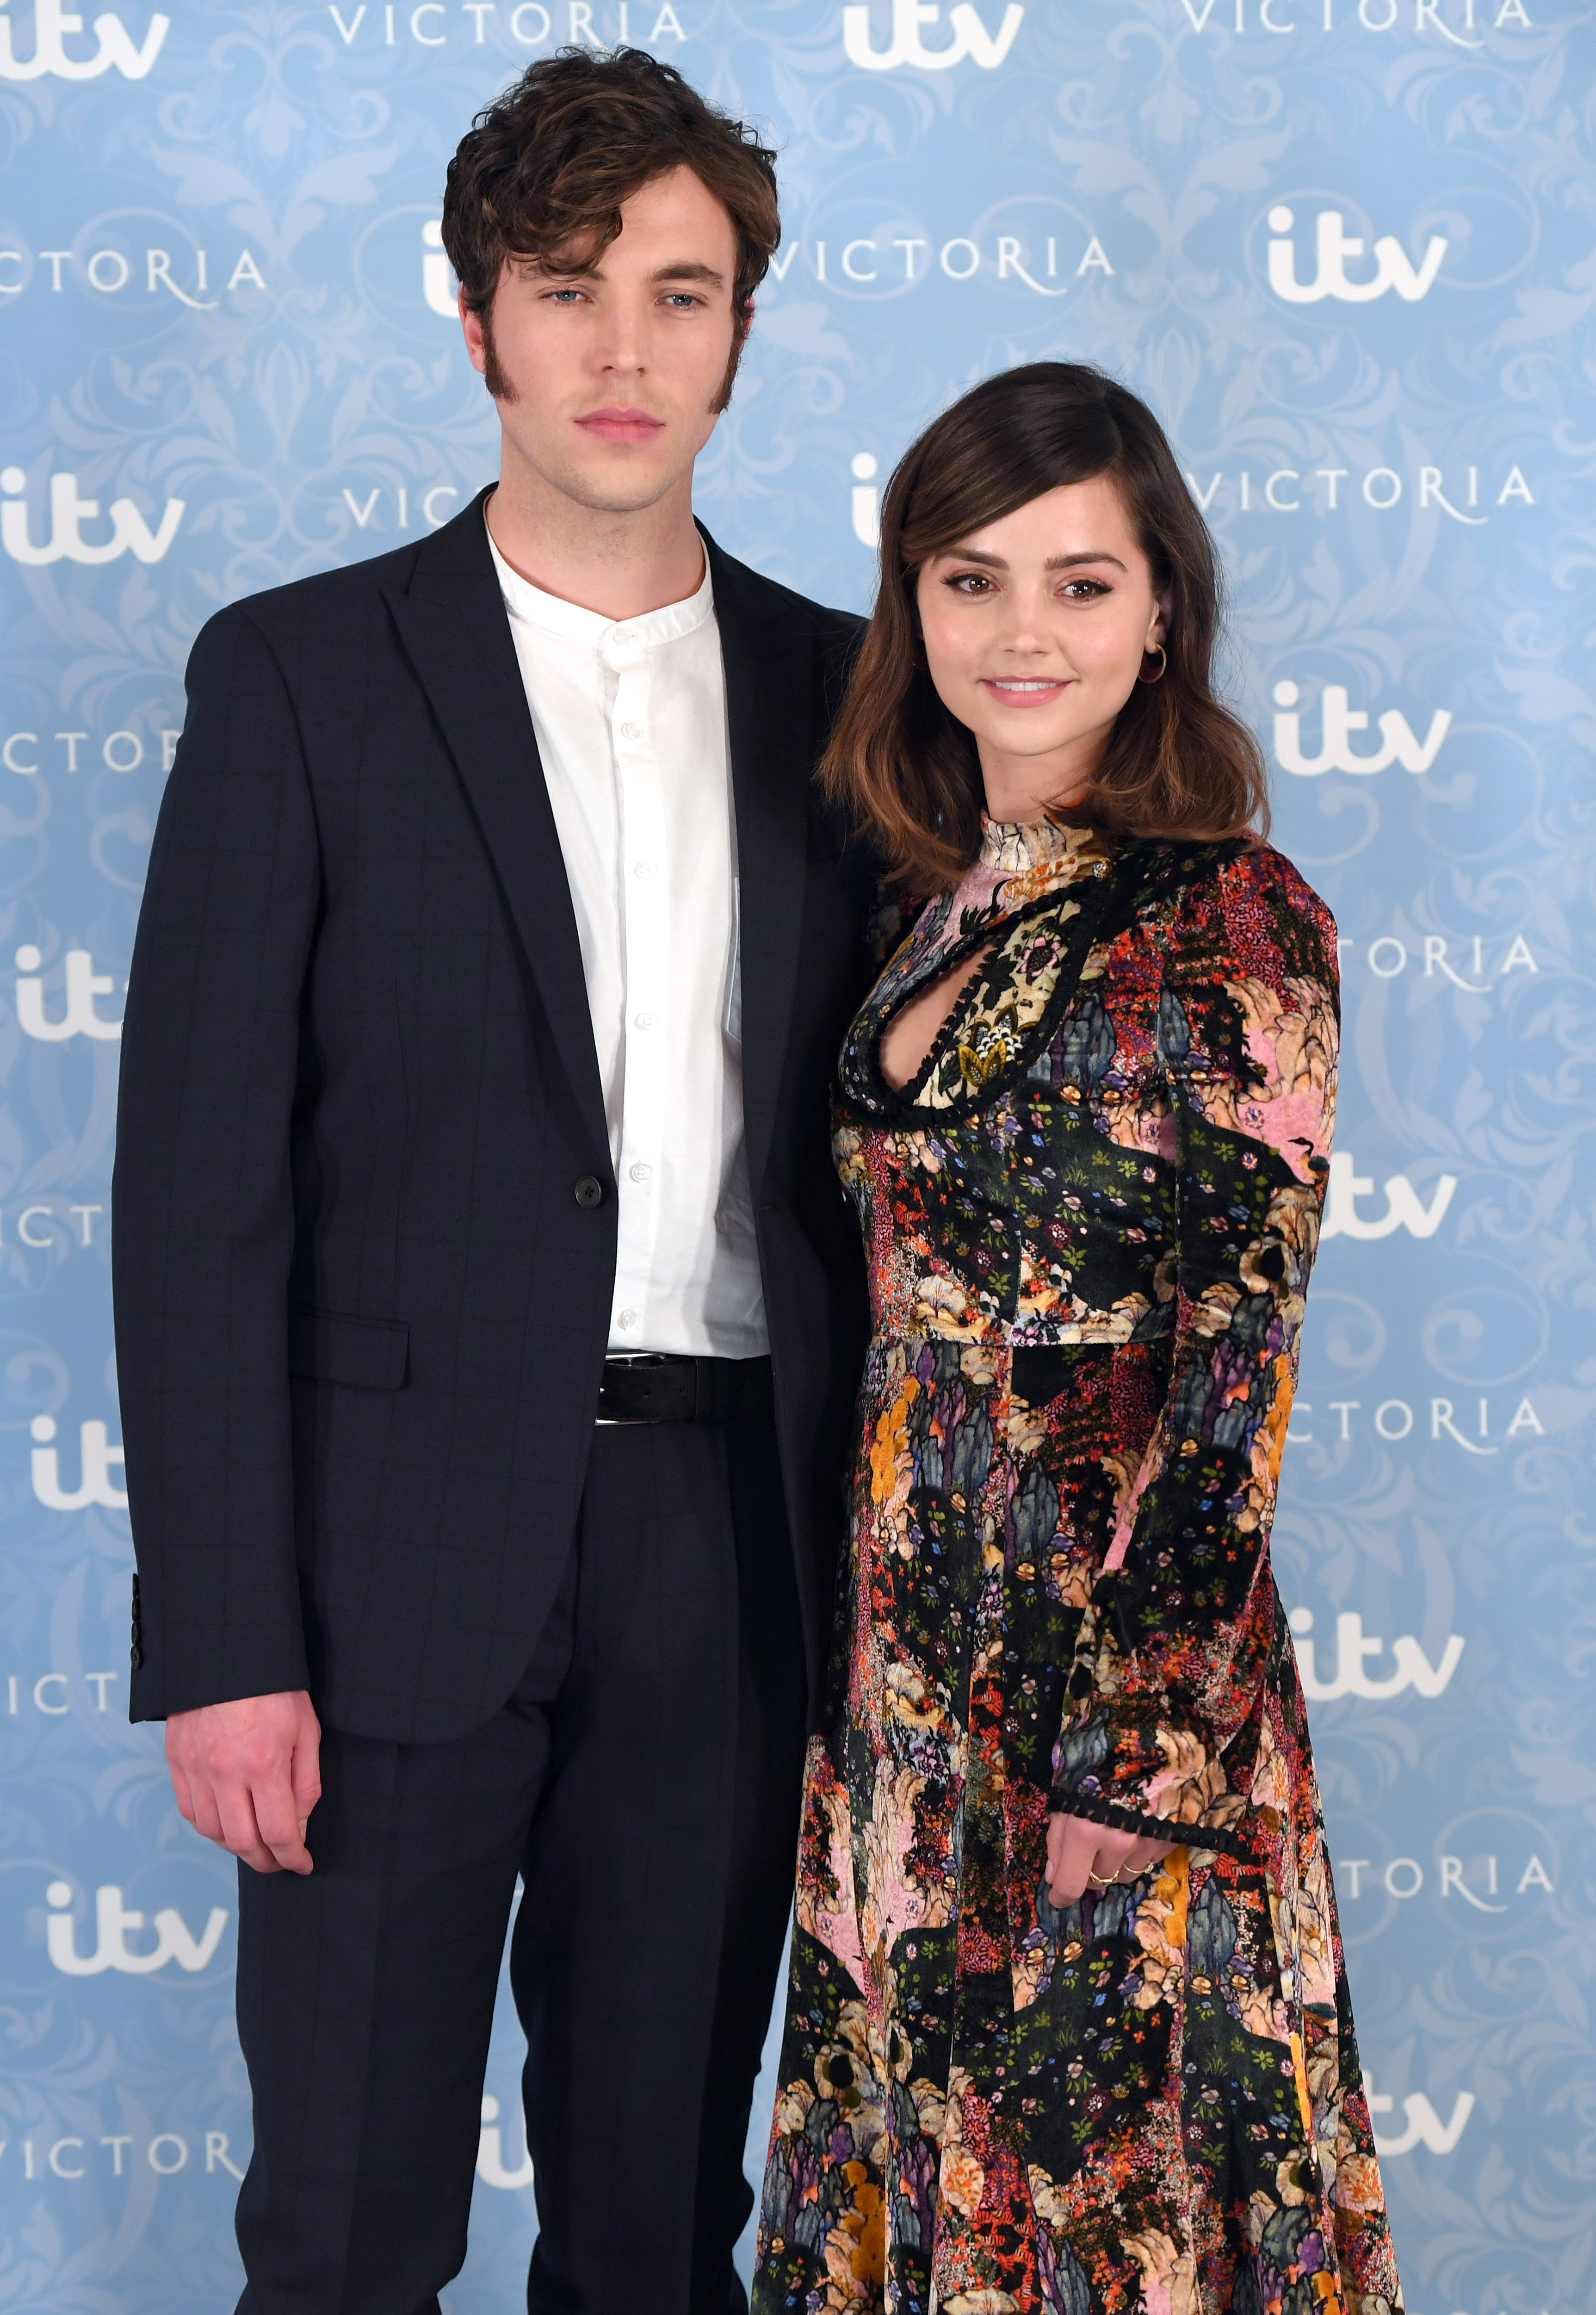 Tom Hughes and Jenna Coleman at the "Victoria" Season 2 Red Carpet Photocall on August 24, 2017 in London, England | Source: Getty Images